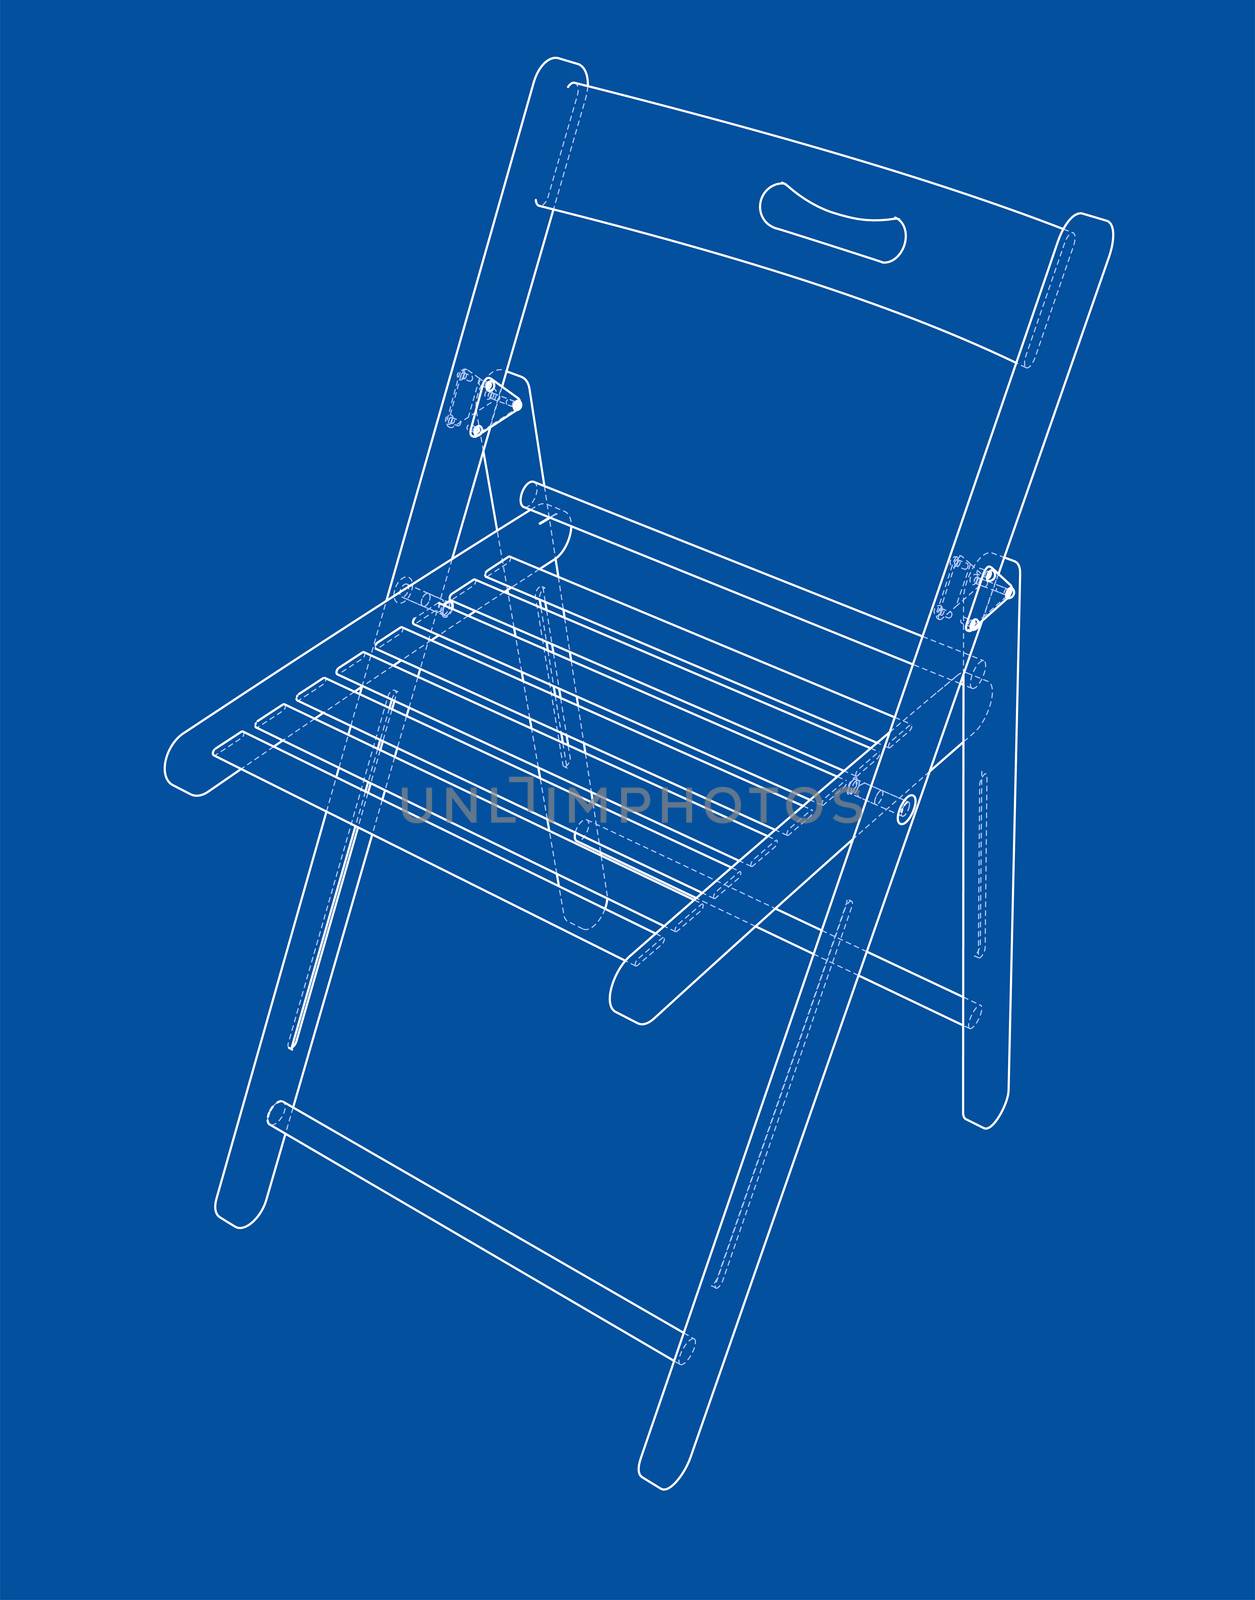 Folding chair sketch. 3d illustration. Wire-frame style